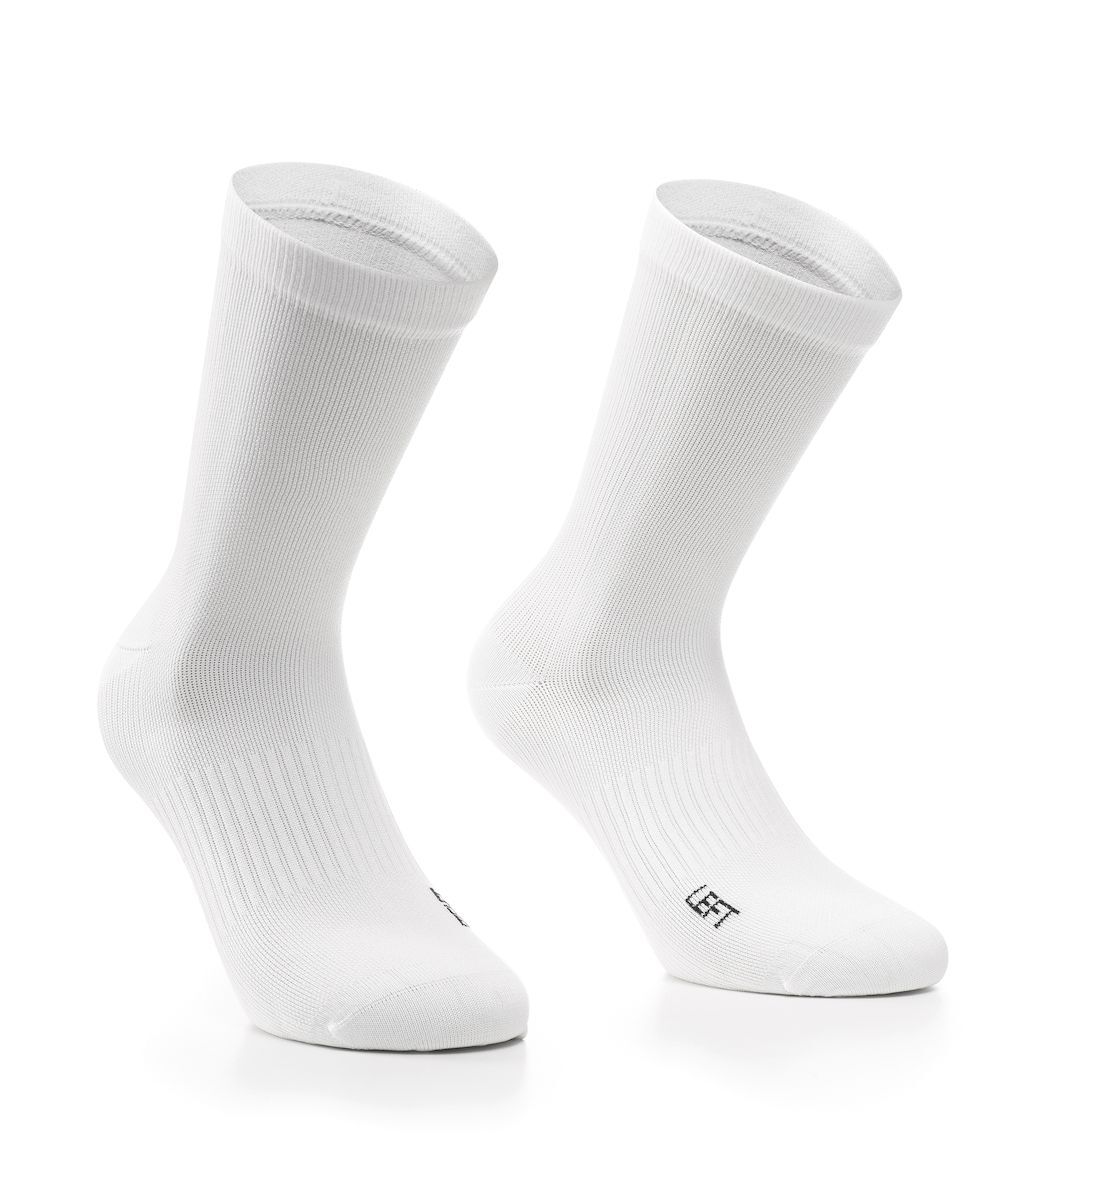 Assos Essence Socks High twin pack - Calcetines ciclismo